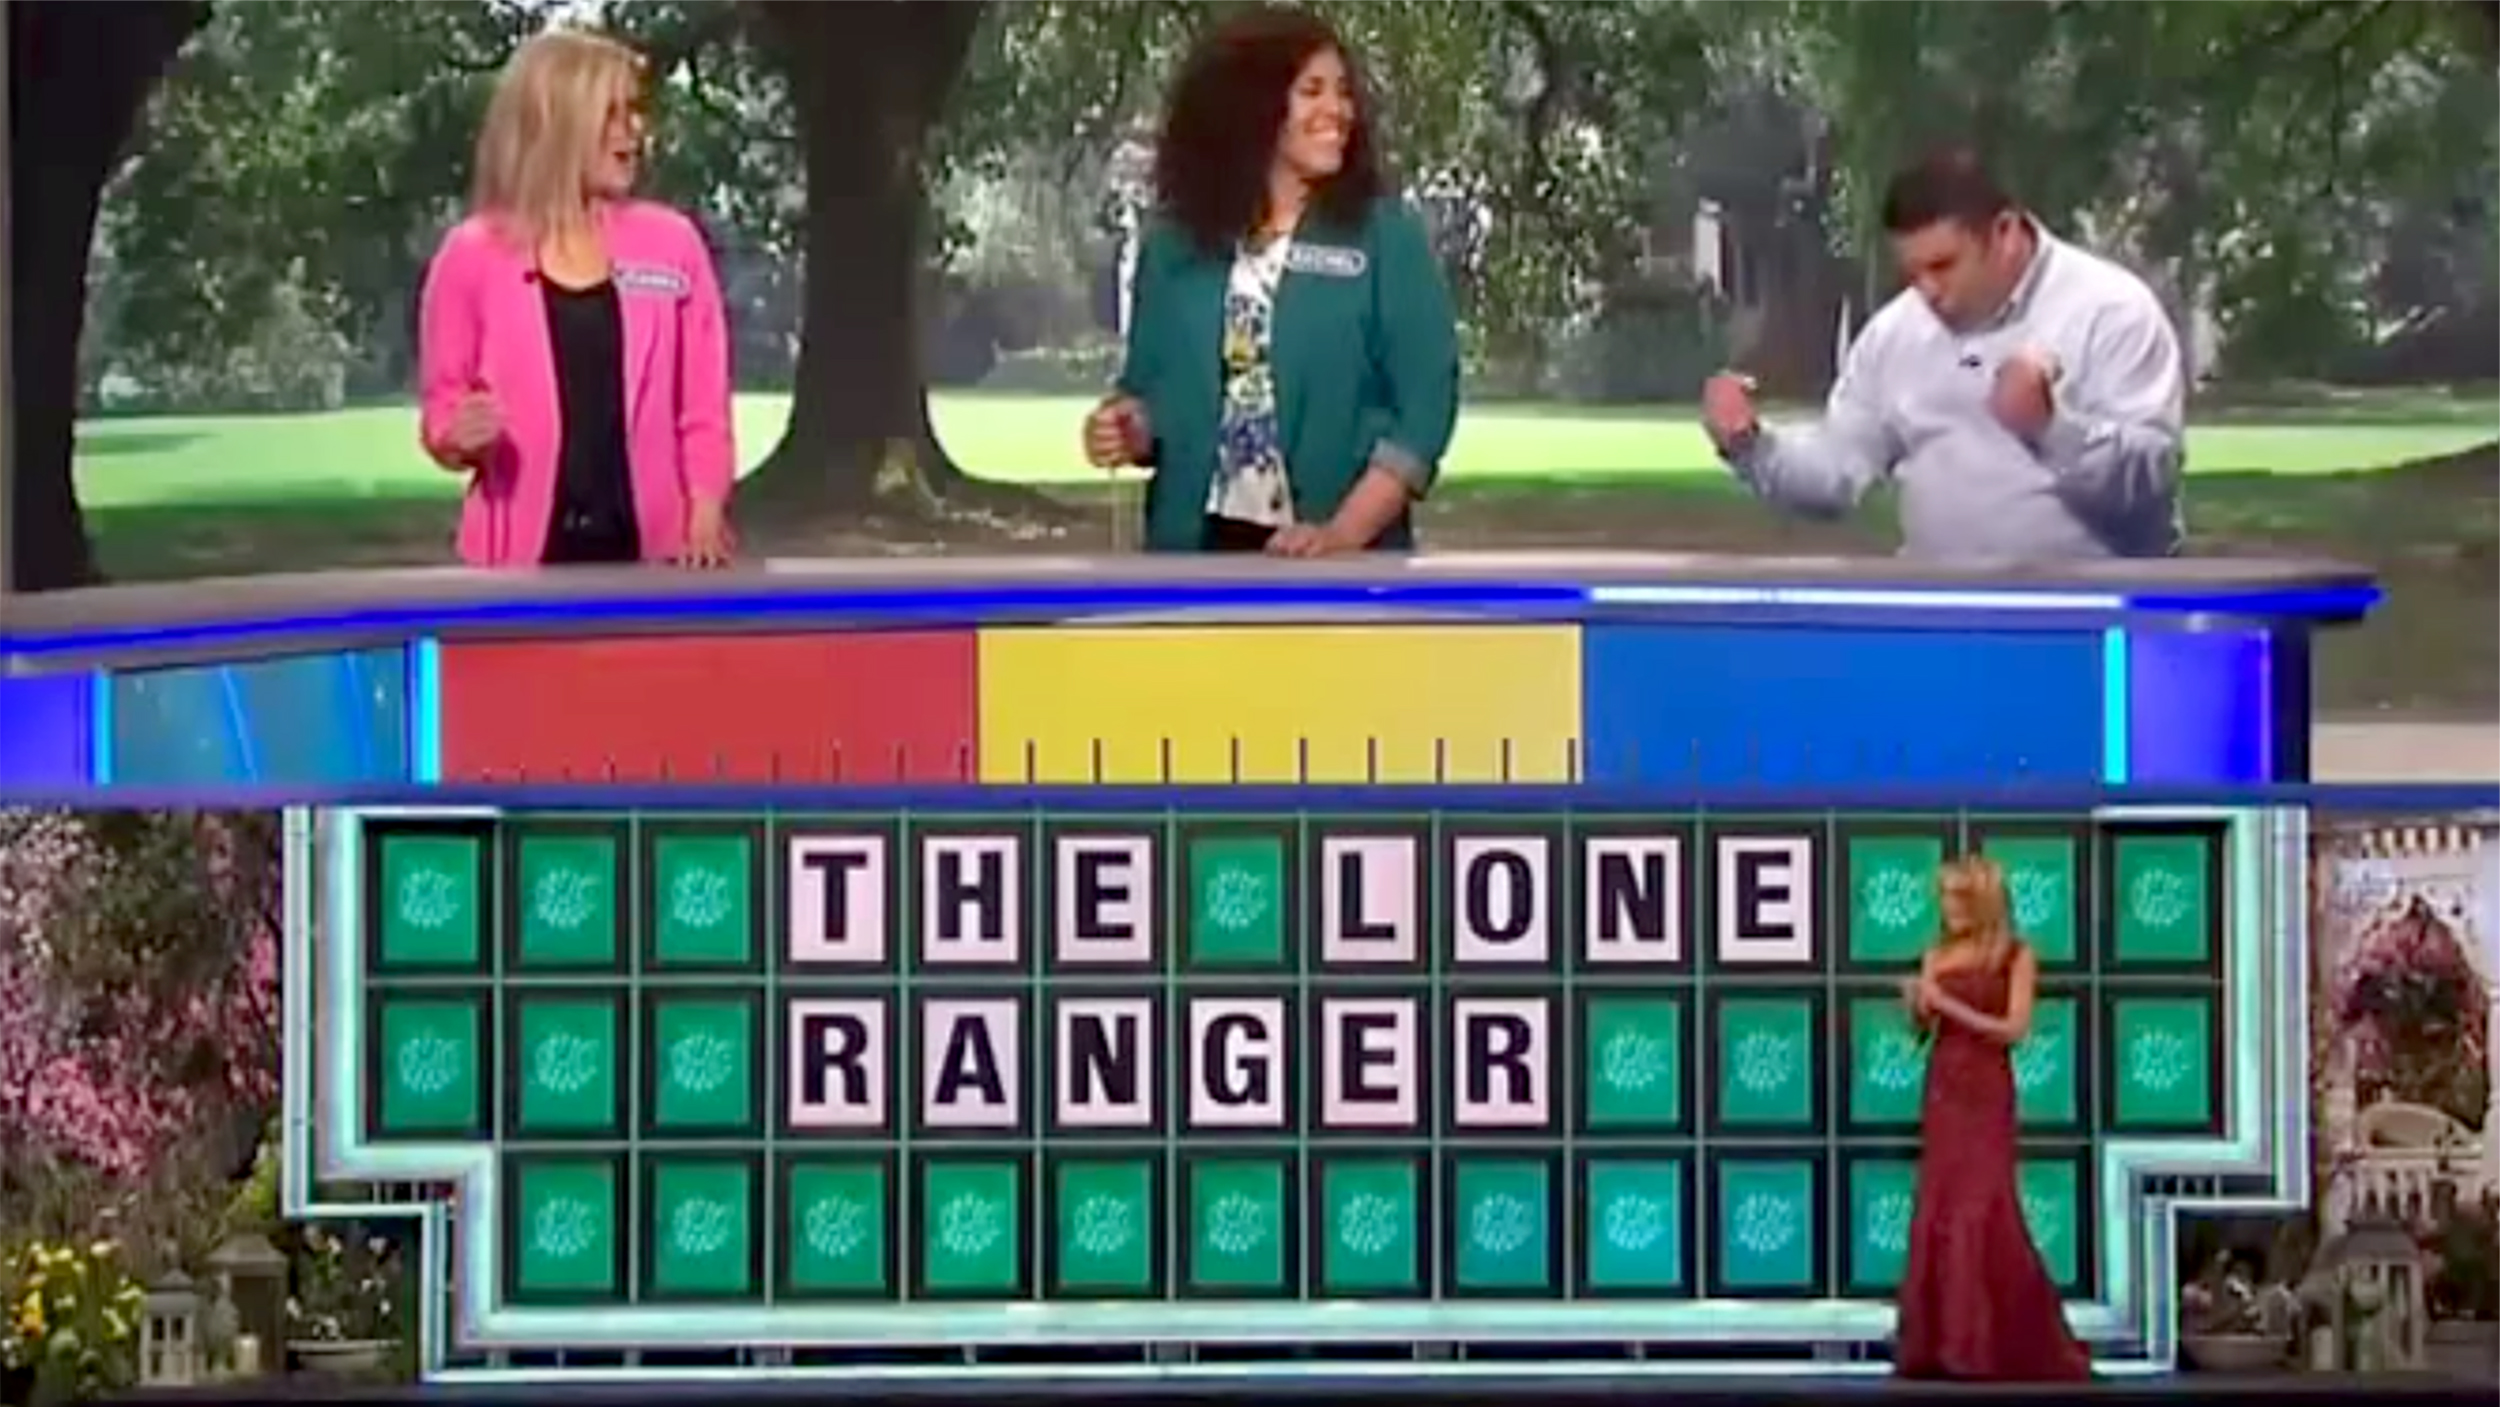 Record-breaking 'Wheel of Fortune' contestant makes jaw-dropping single